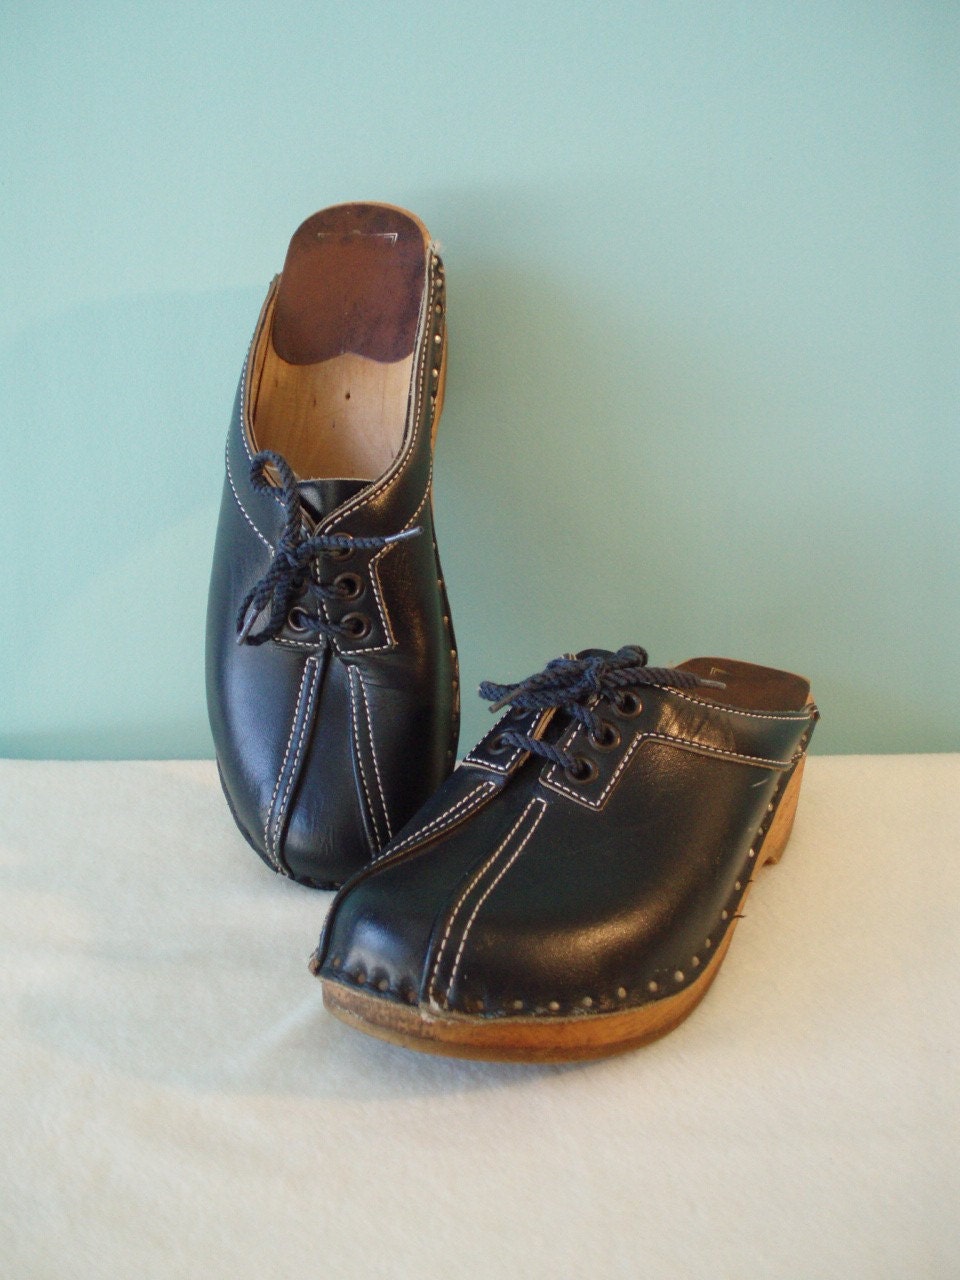 Classic Wood Clogs from Bastad Navy Blue Size 6 1/2 37